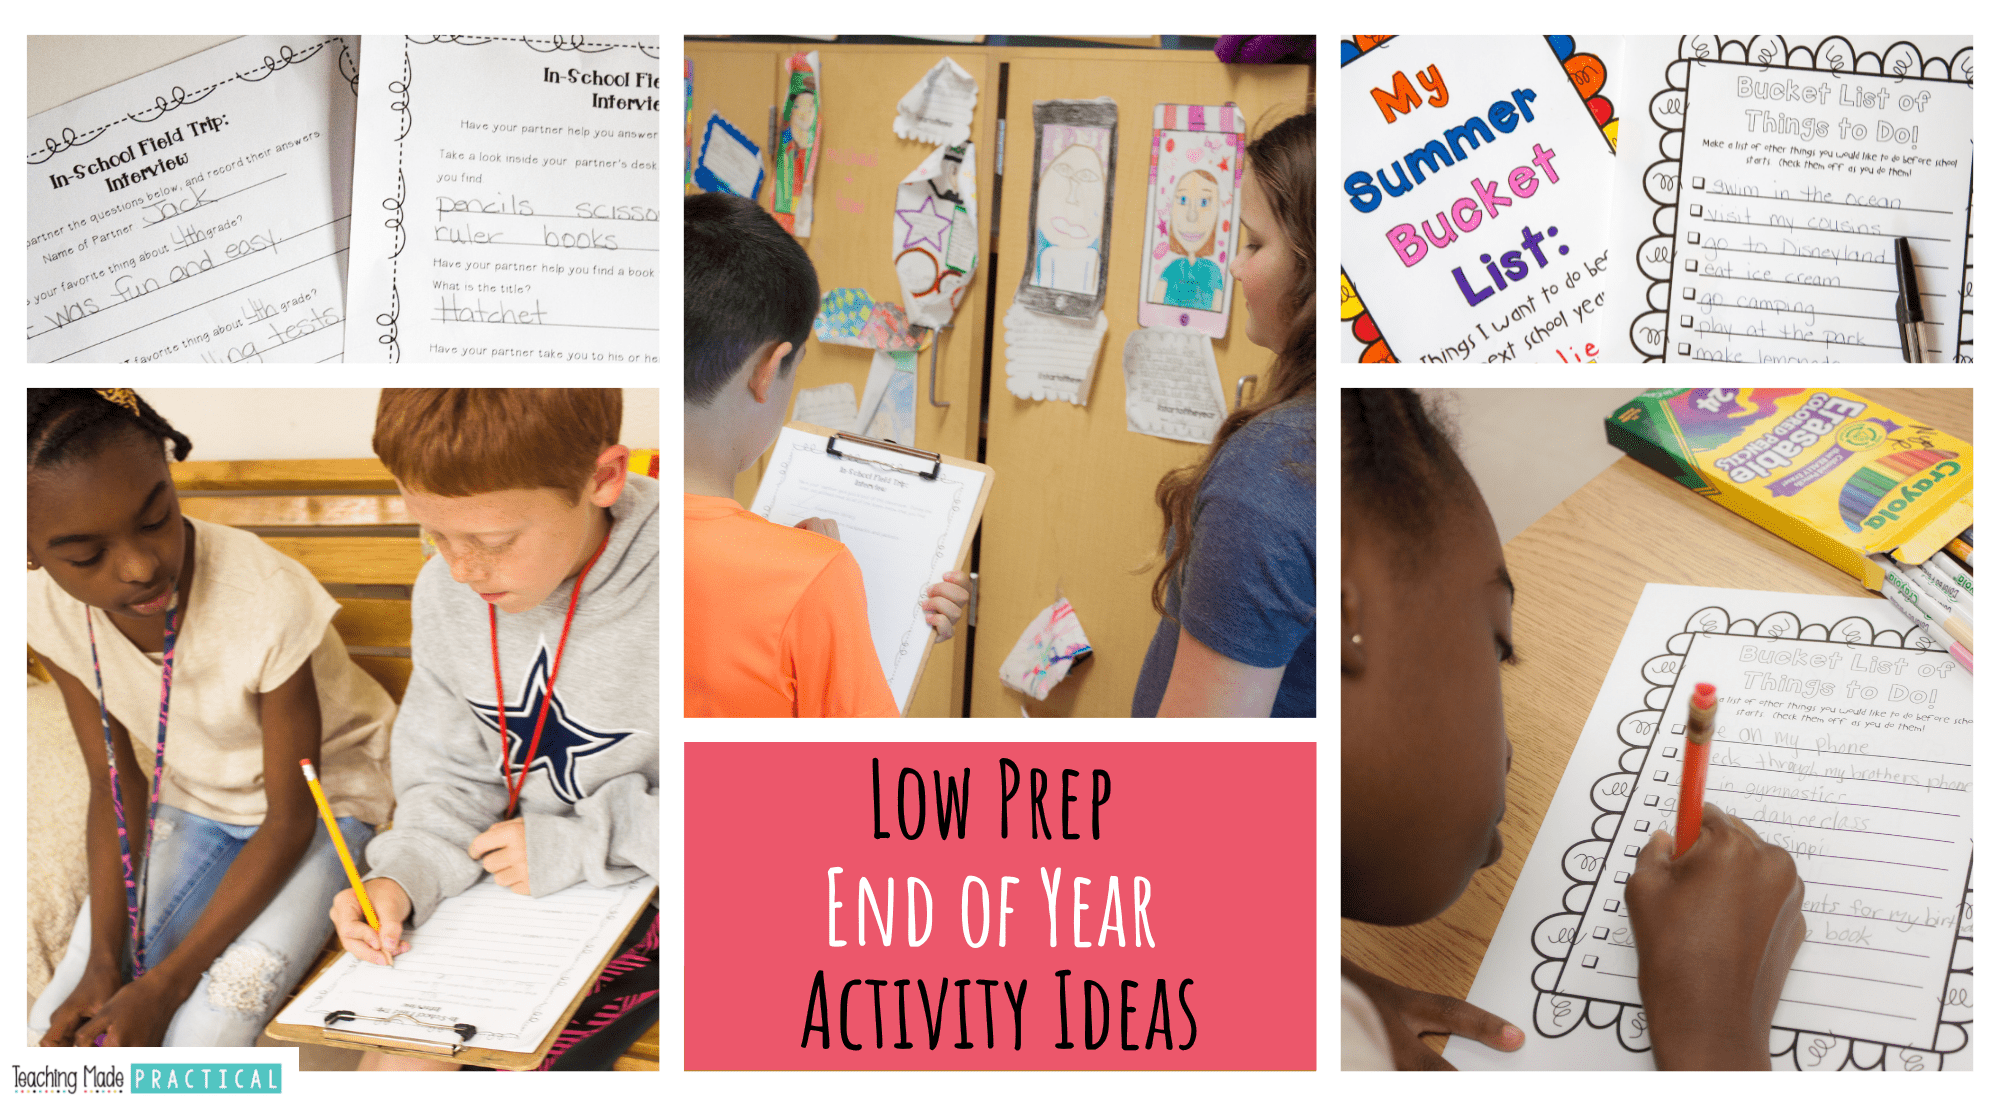 7 low prep end of the year activity ideas for 3rd grade, 4th grade, and 5th grade students